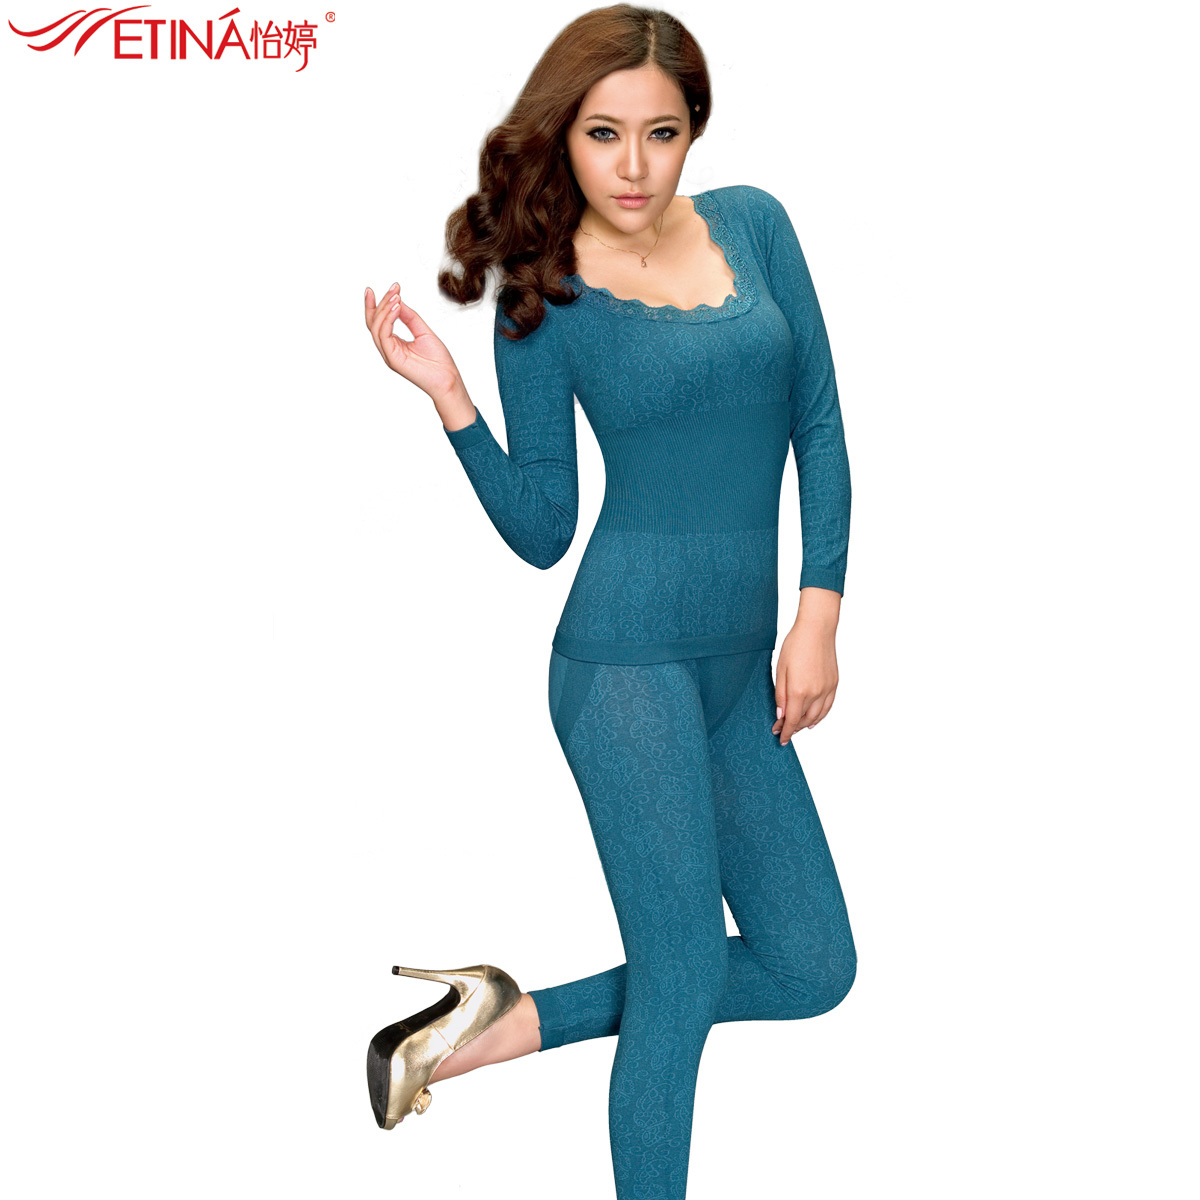 2 set large-neck lace thin seamless beauty care tight-fitting women's underwear cotton sweater long johns long johns